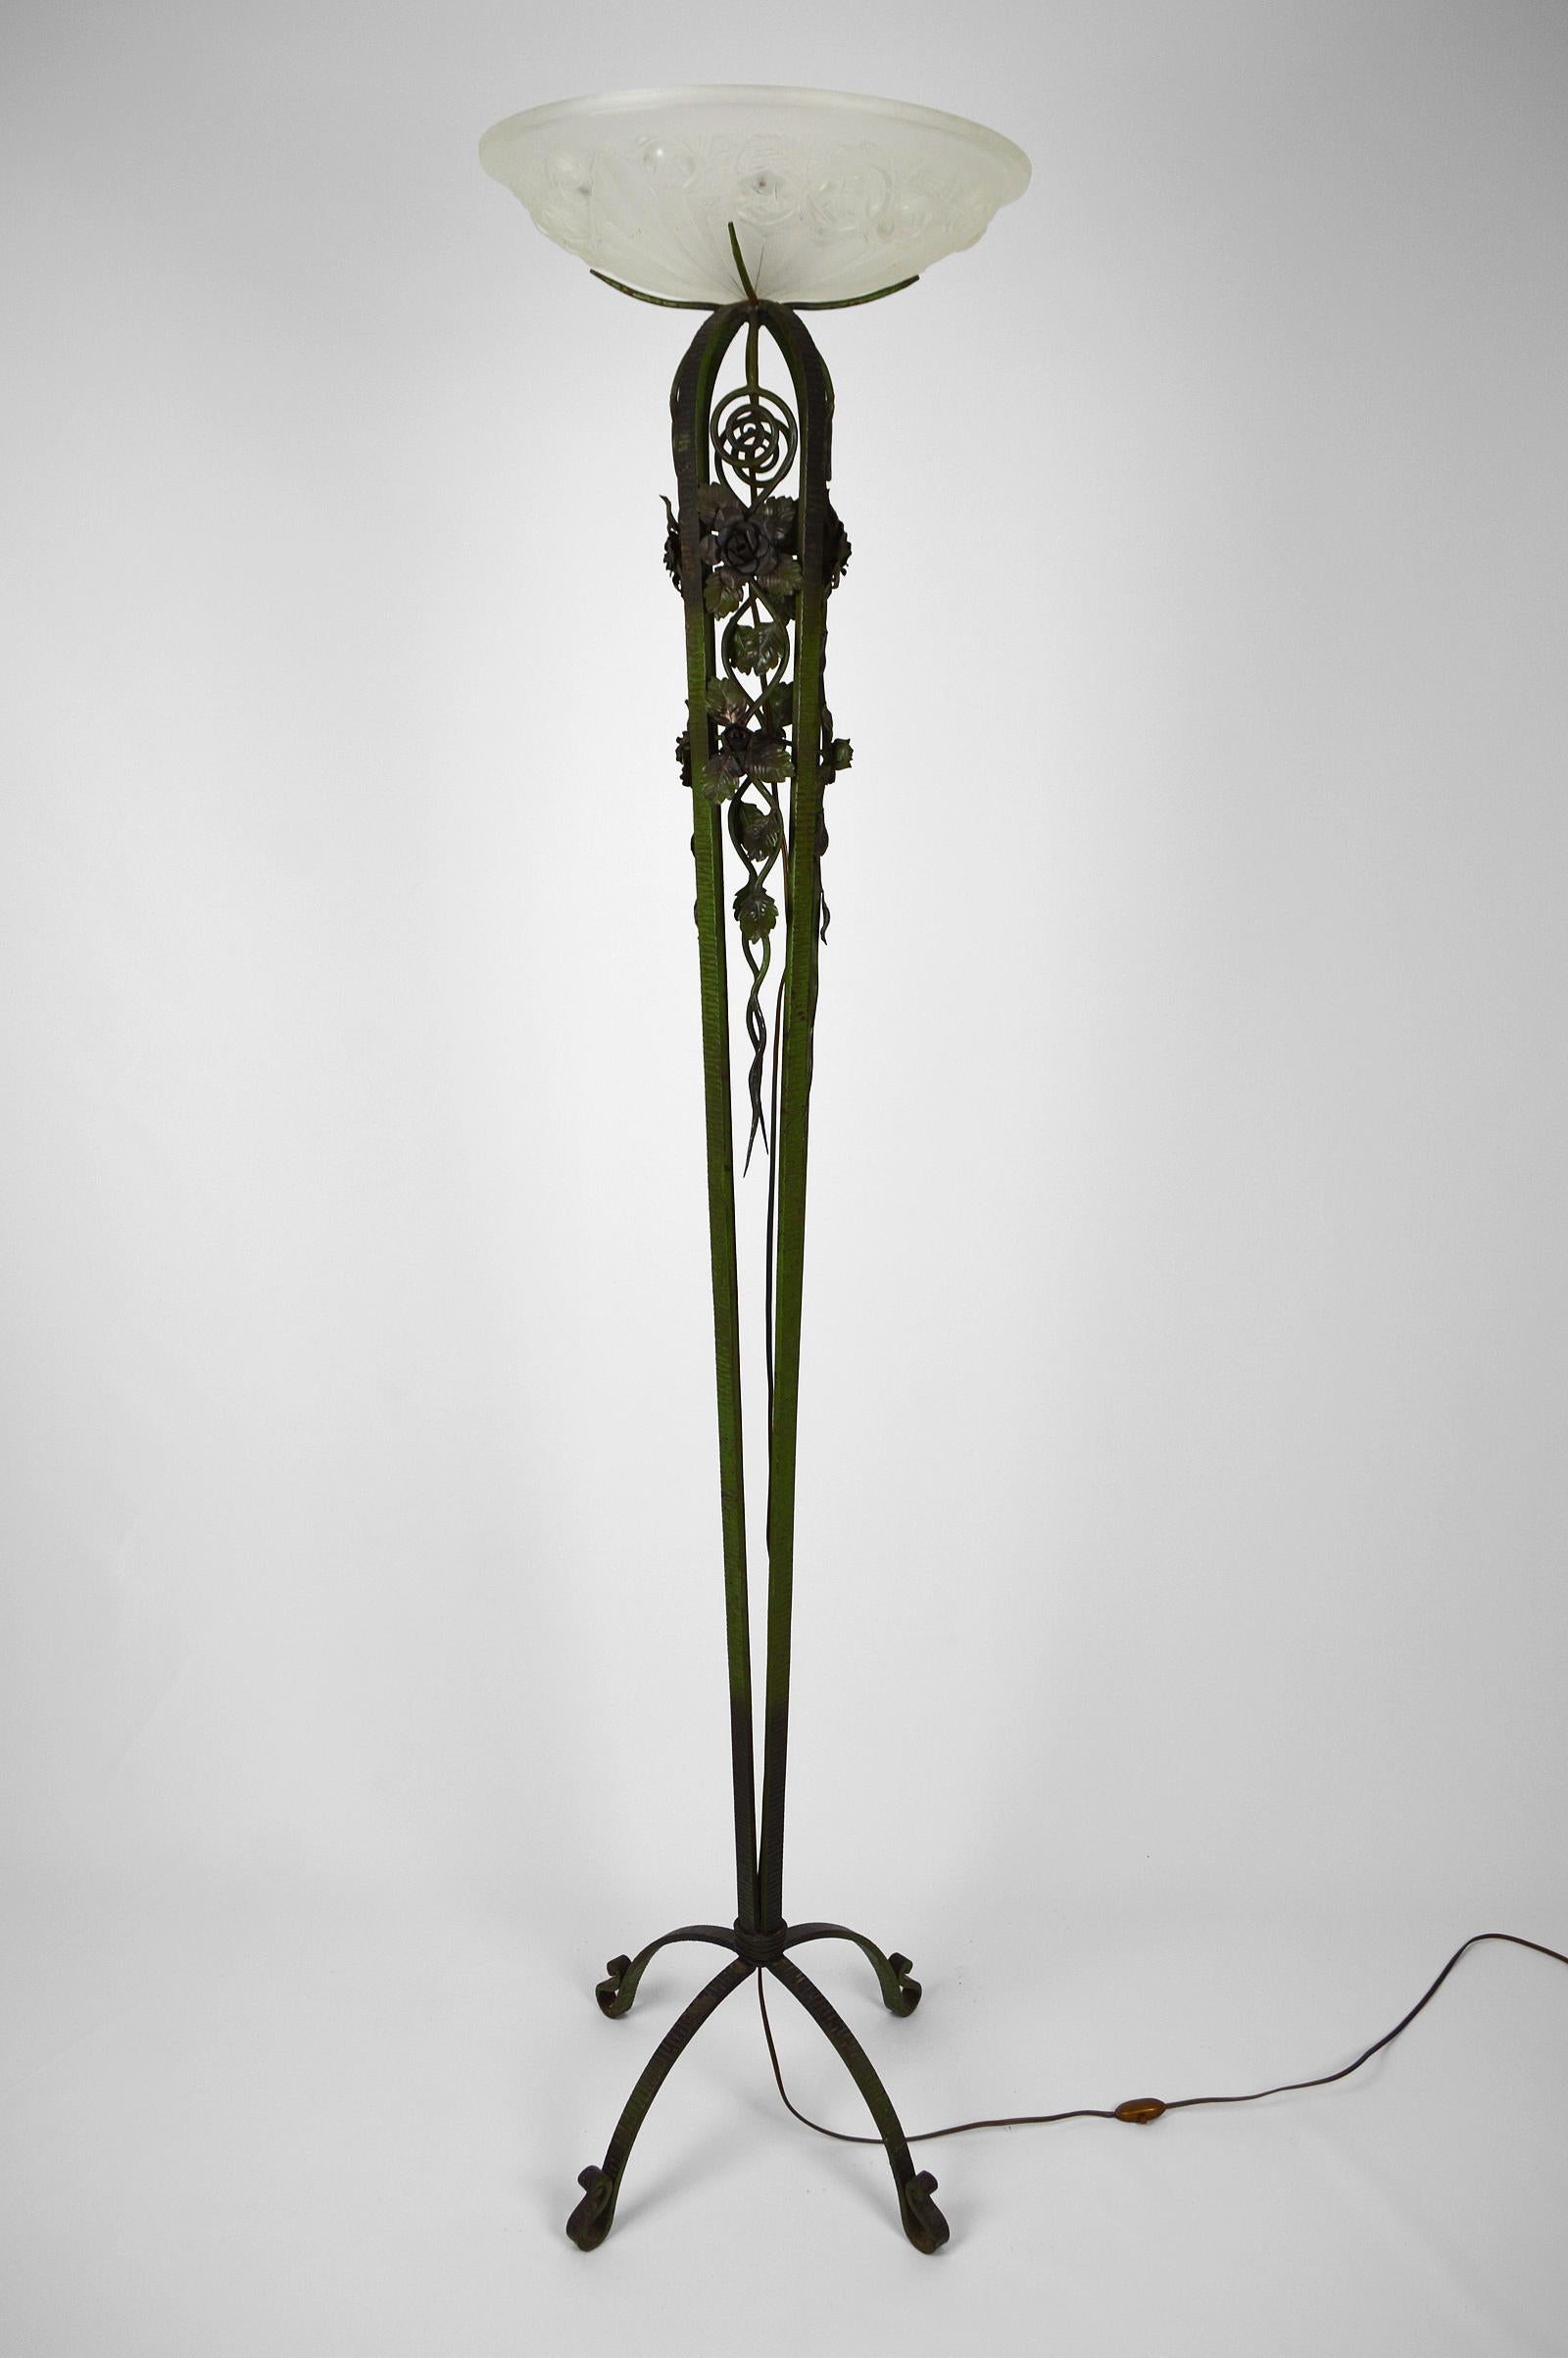 Superb Art Deco floor lamp in wrought iron with green patina.

Nicely decorated with climbing plants (rose bushes), roses and scrolls.
Molded glass basin with floral motifs.
Beautiful metal patina.

Art Deco, France, around 1930.
Unsigned,